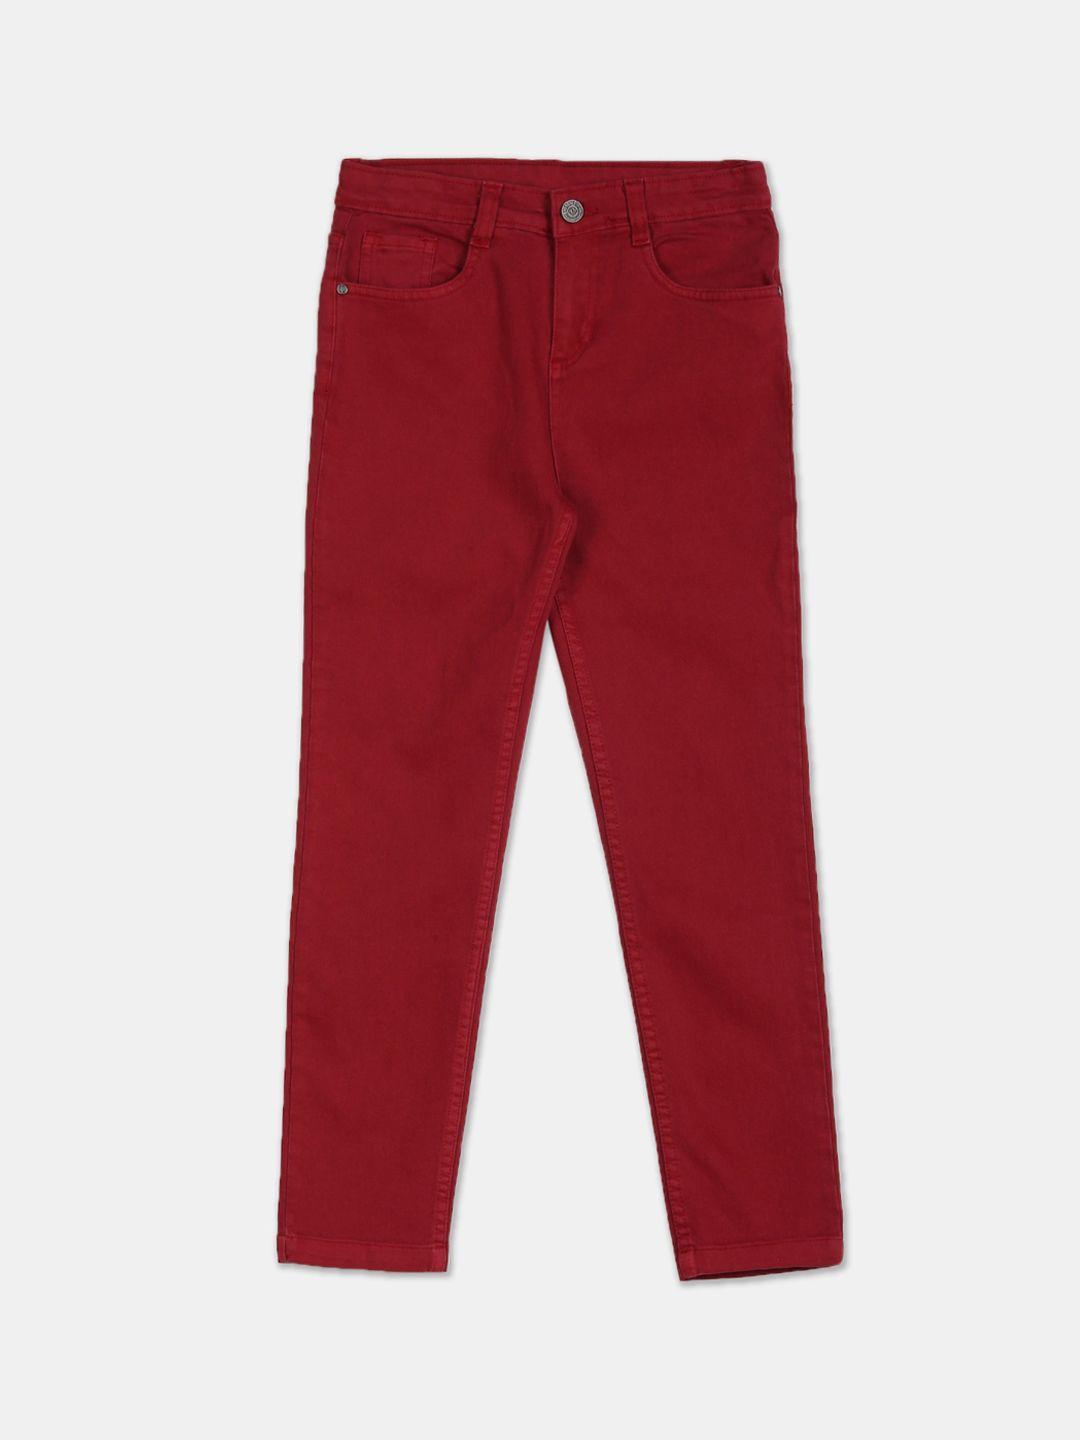 Cherokee Boys Red Jeans